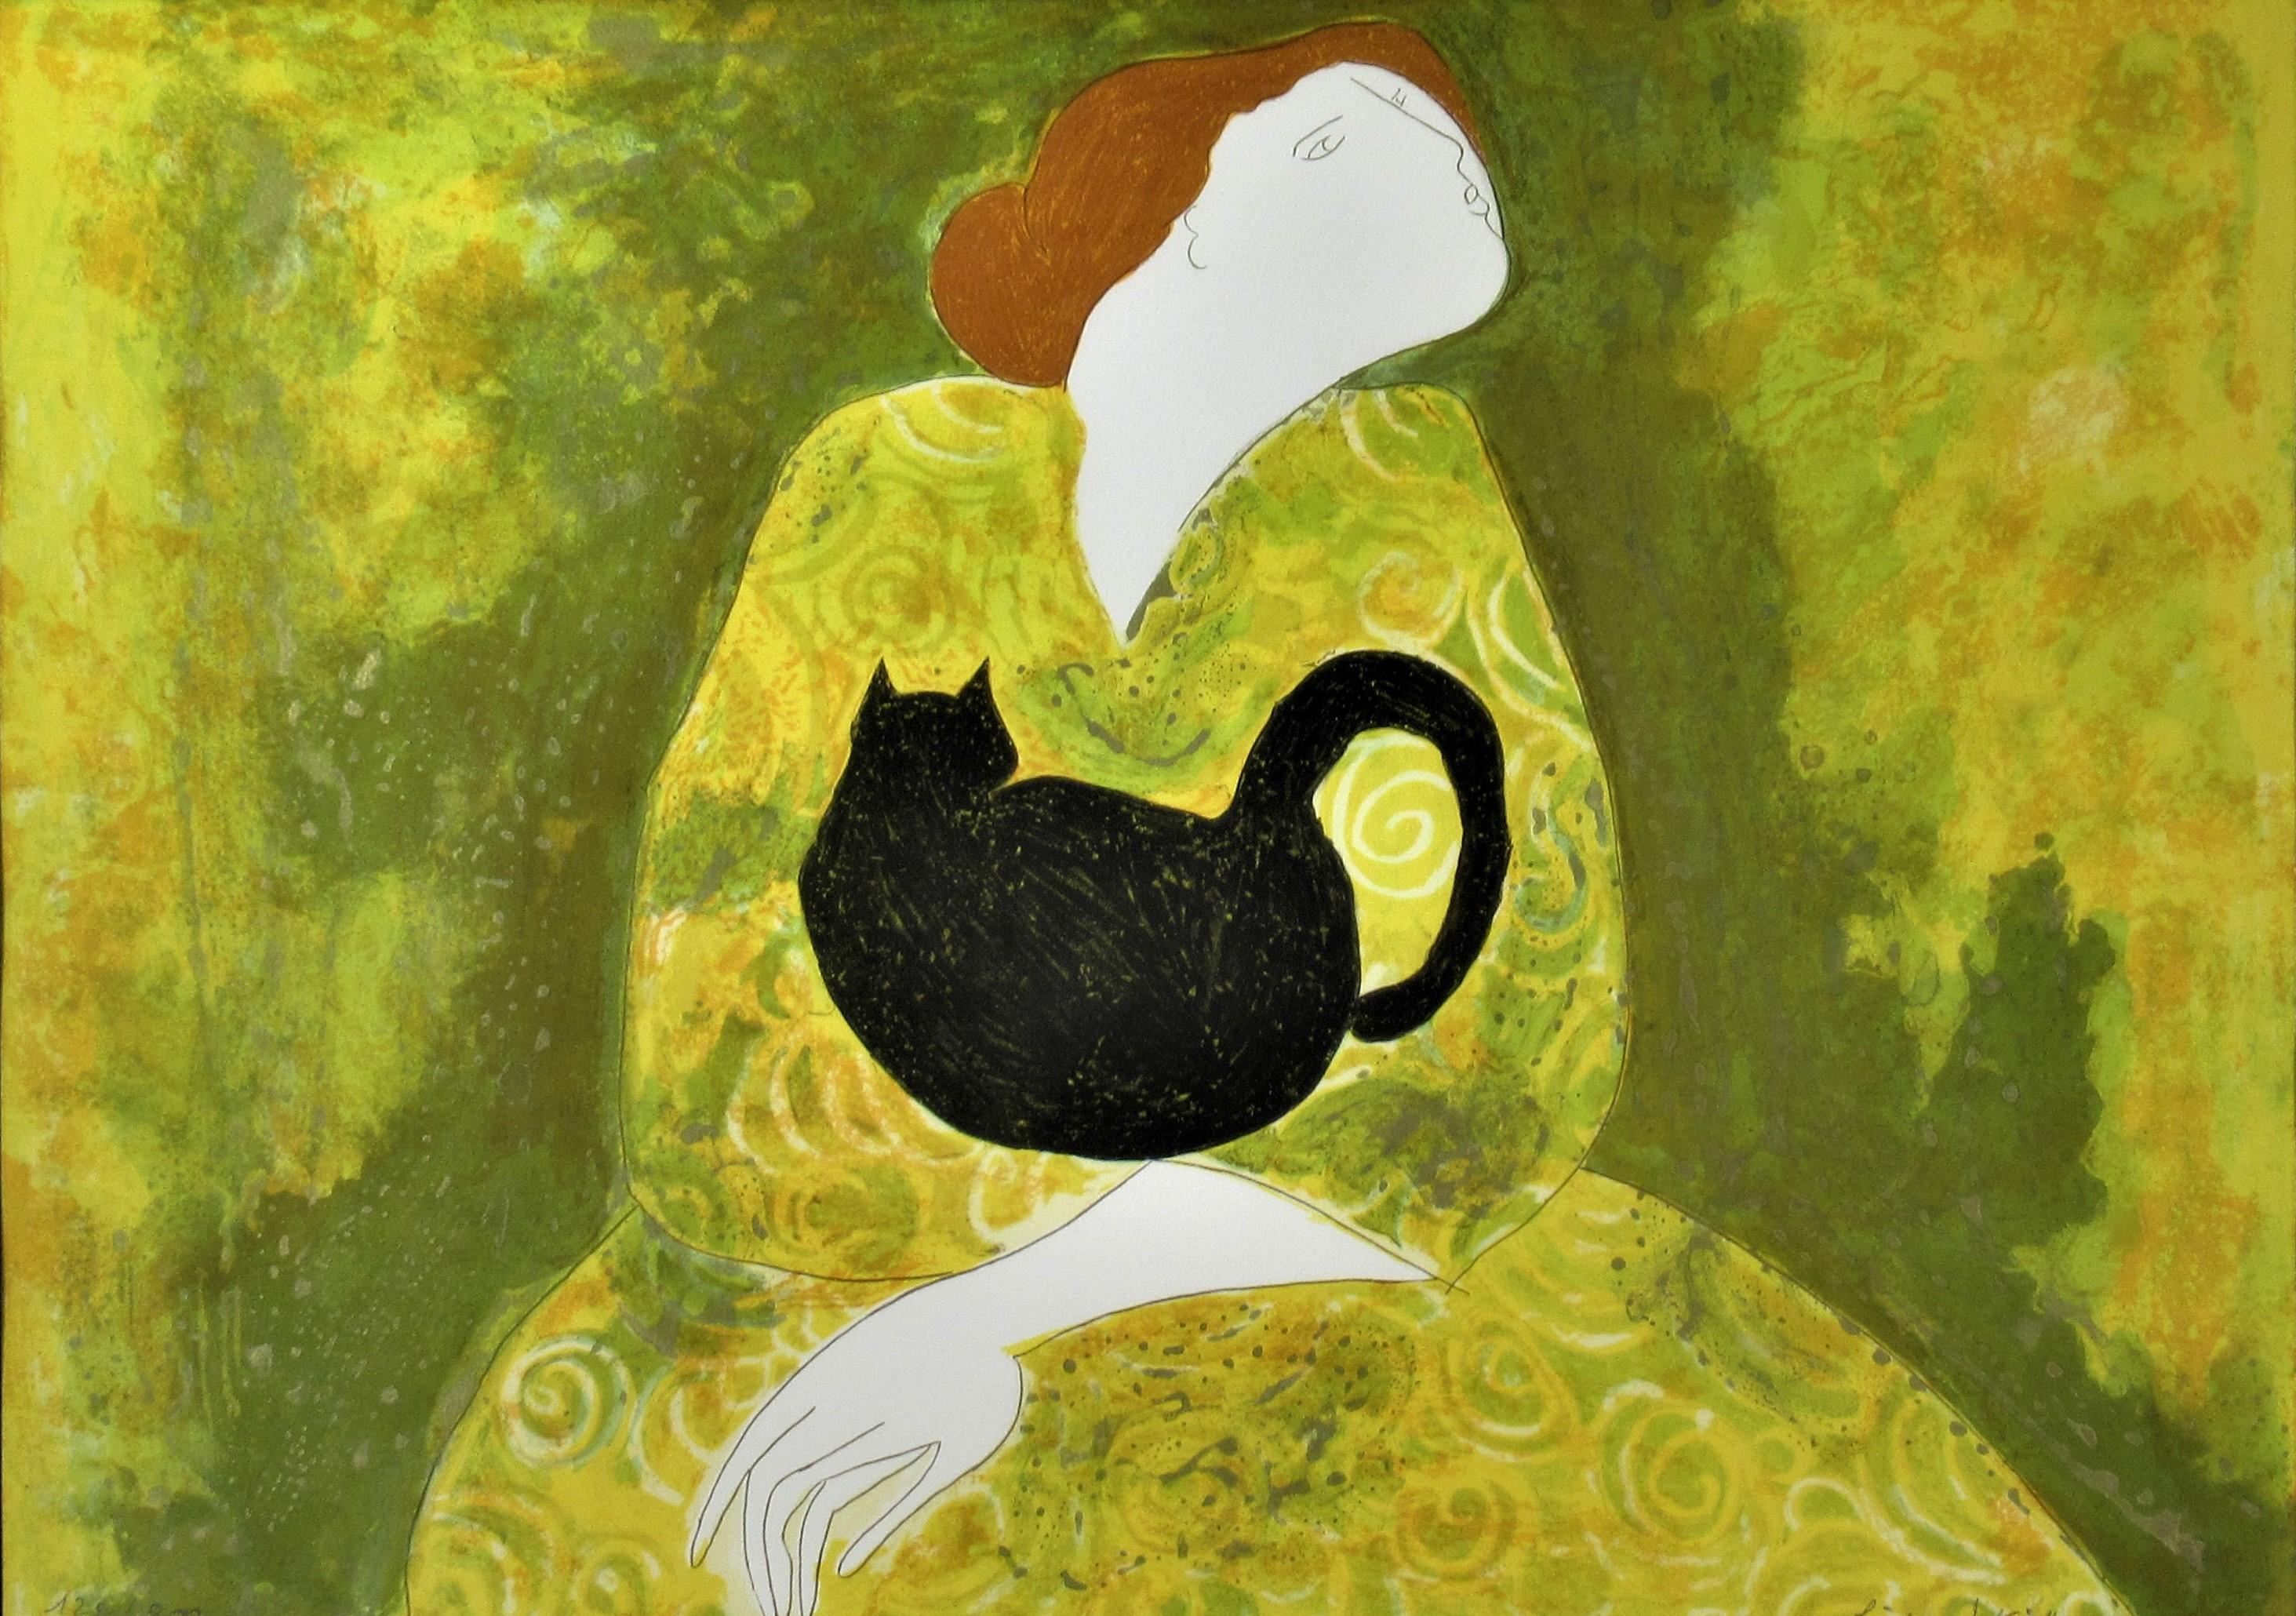 Woman with Cat - Print by Linda Le Kinff